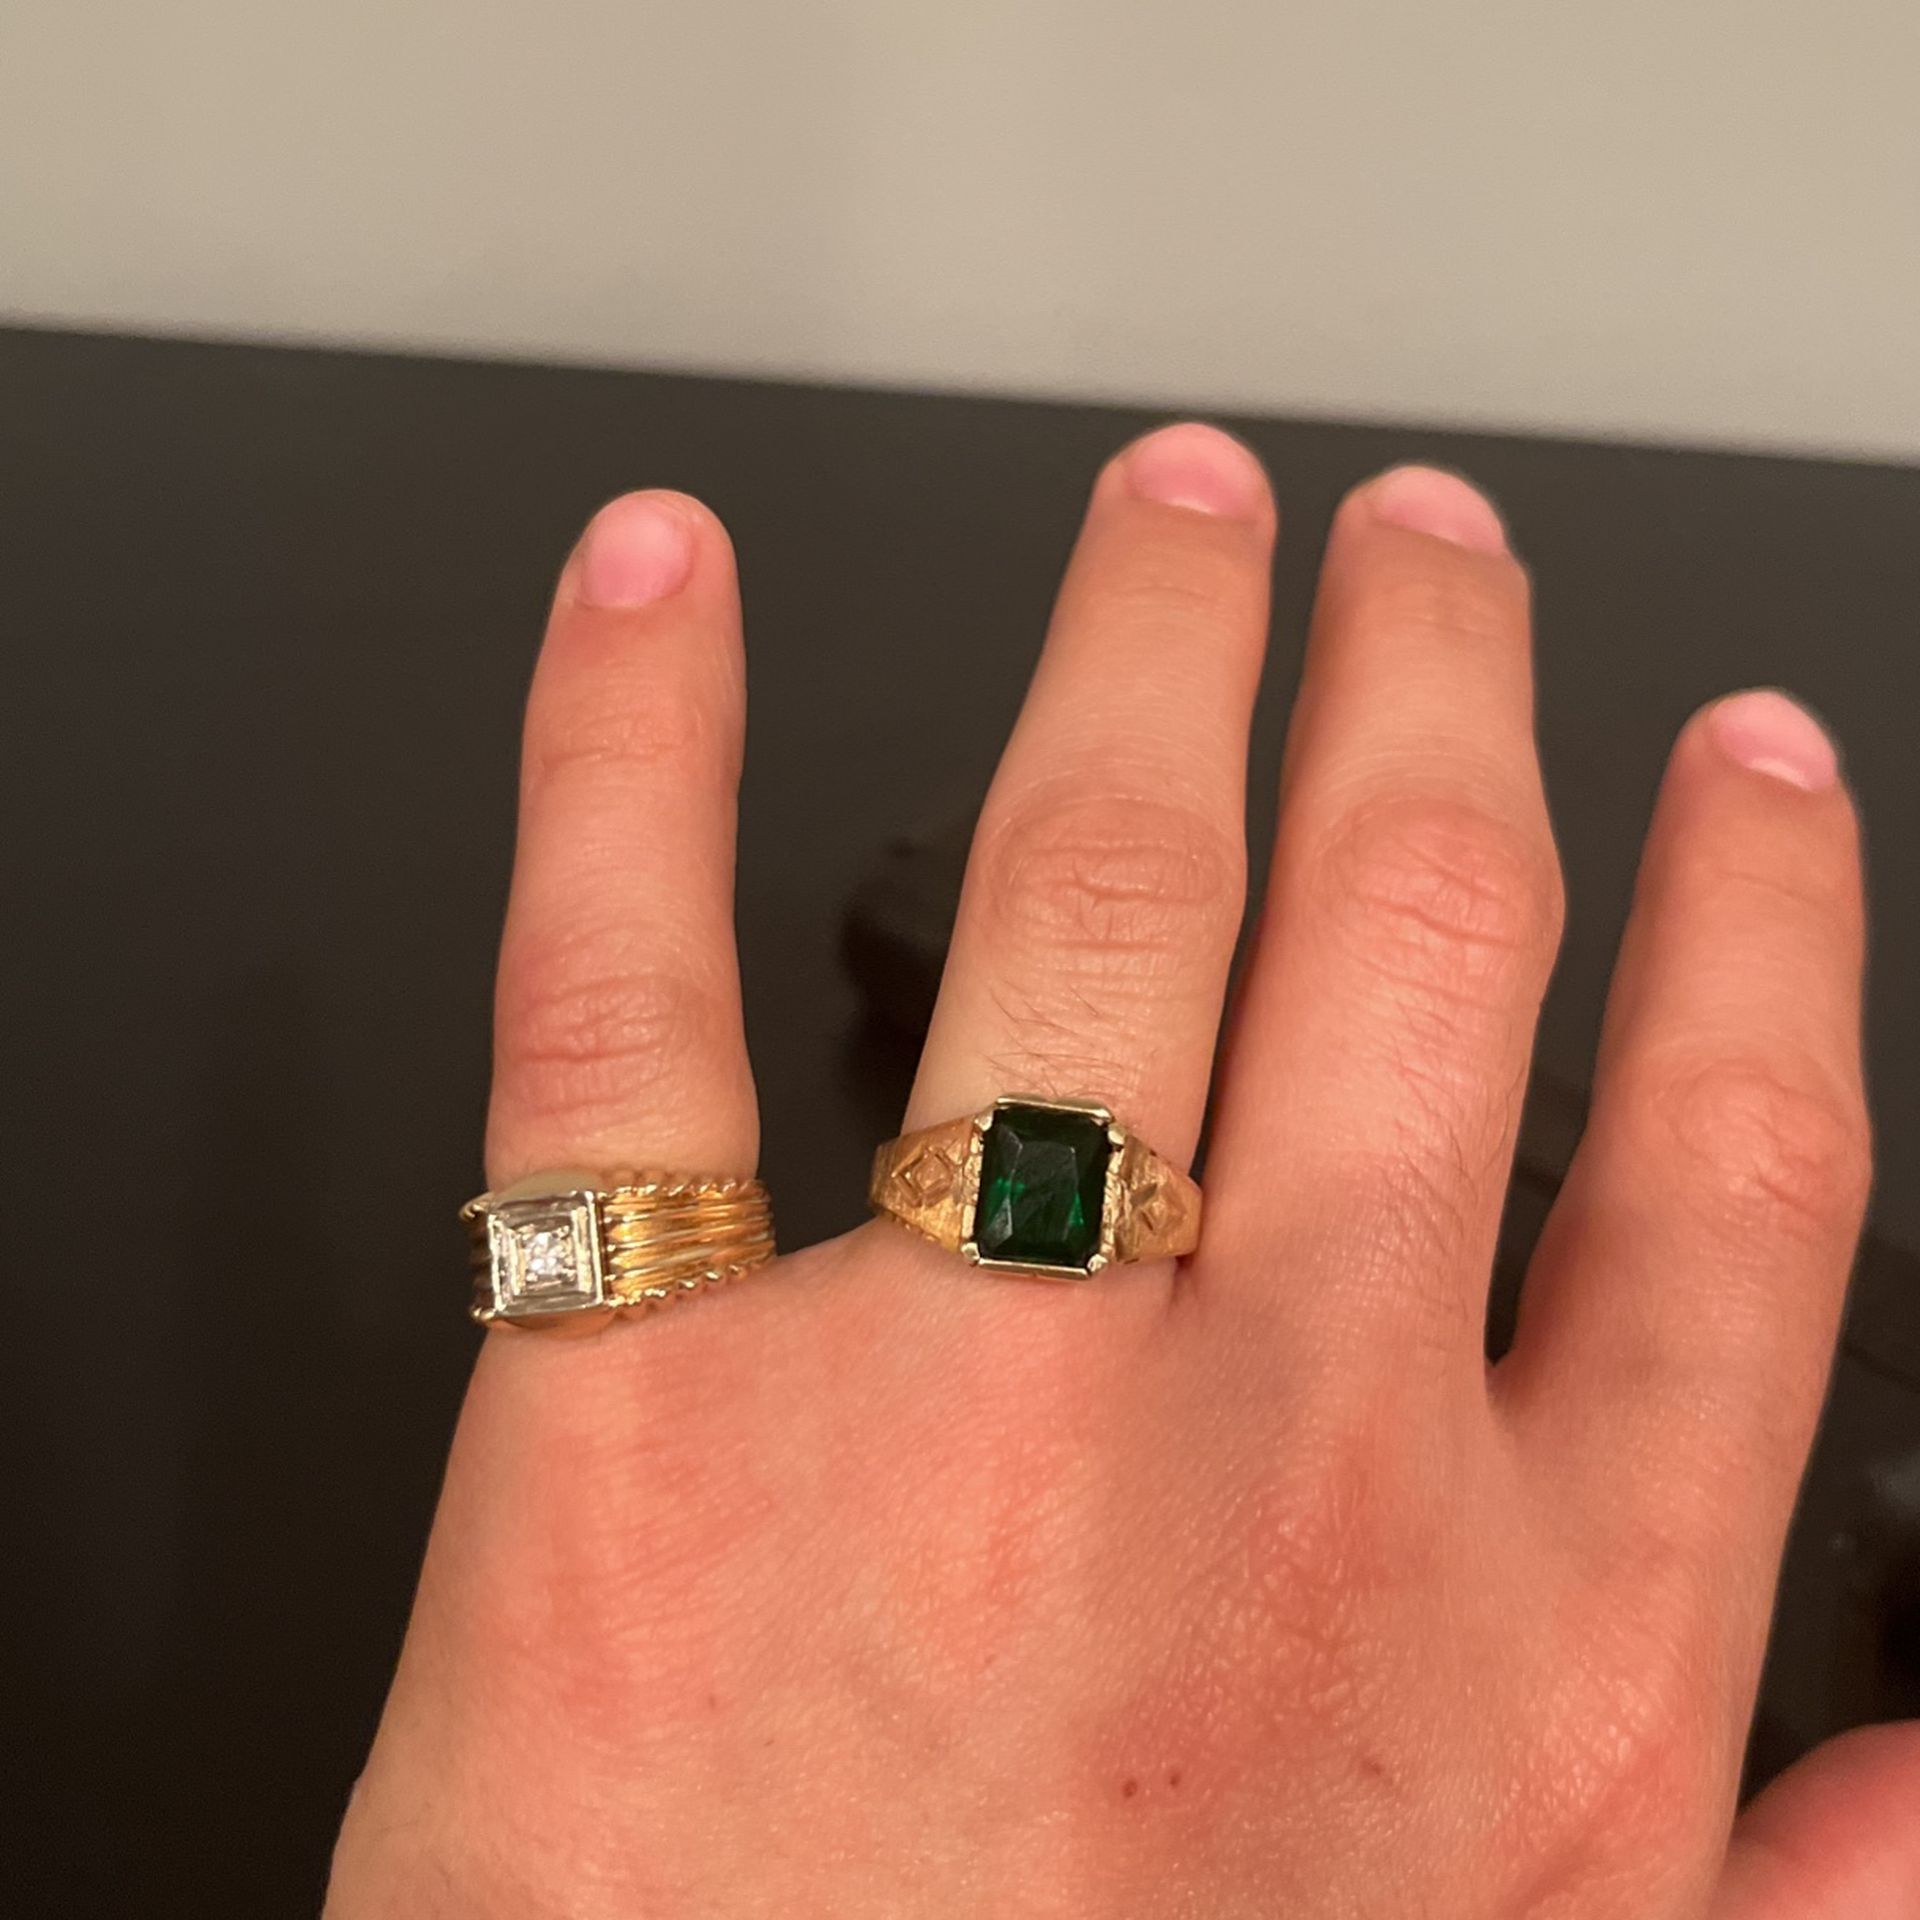 14k Solid Gold Rings “Non Real Emerald” 1Inch Wide 6.4 Grams “Real Diamond” 1Inch 6.5 Grams Obo